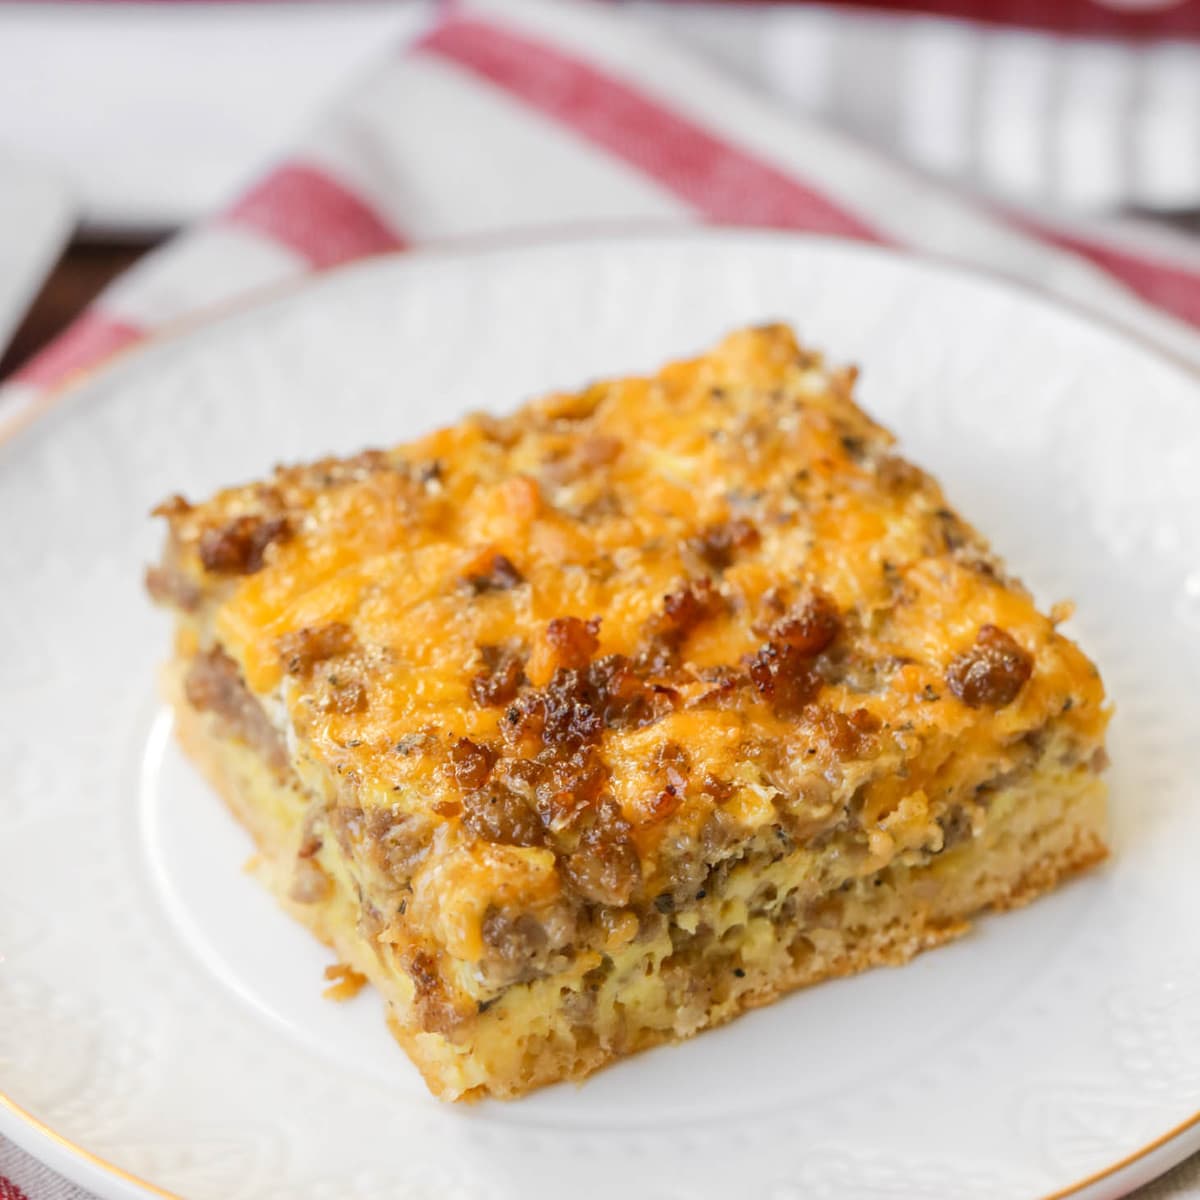 Christmas breakfast ideas - a square slice of sausage breakfast casserole on a white plate.